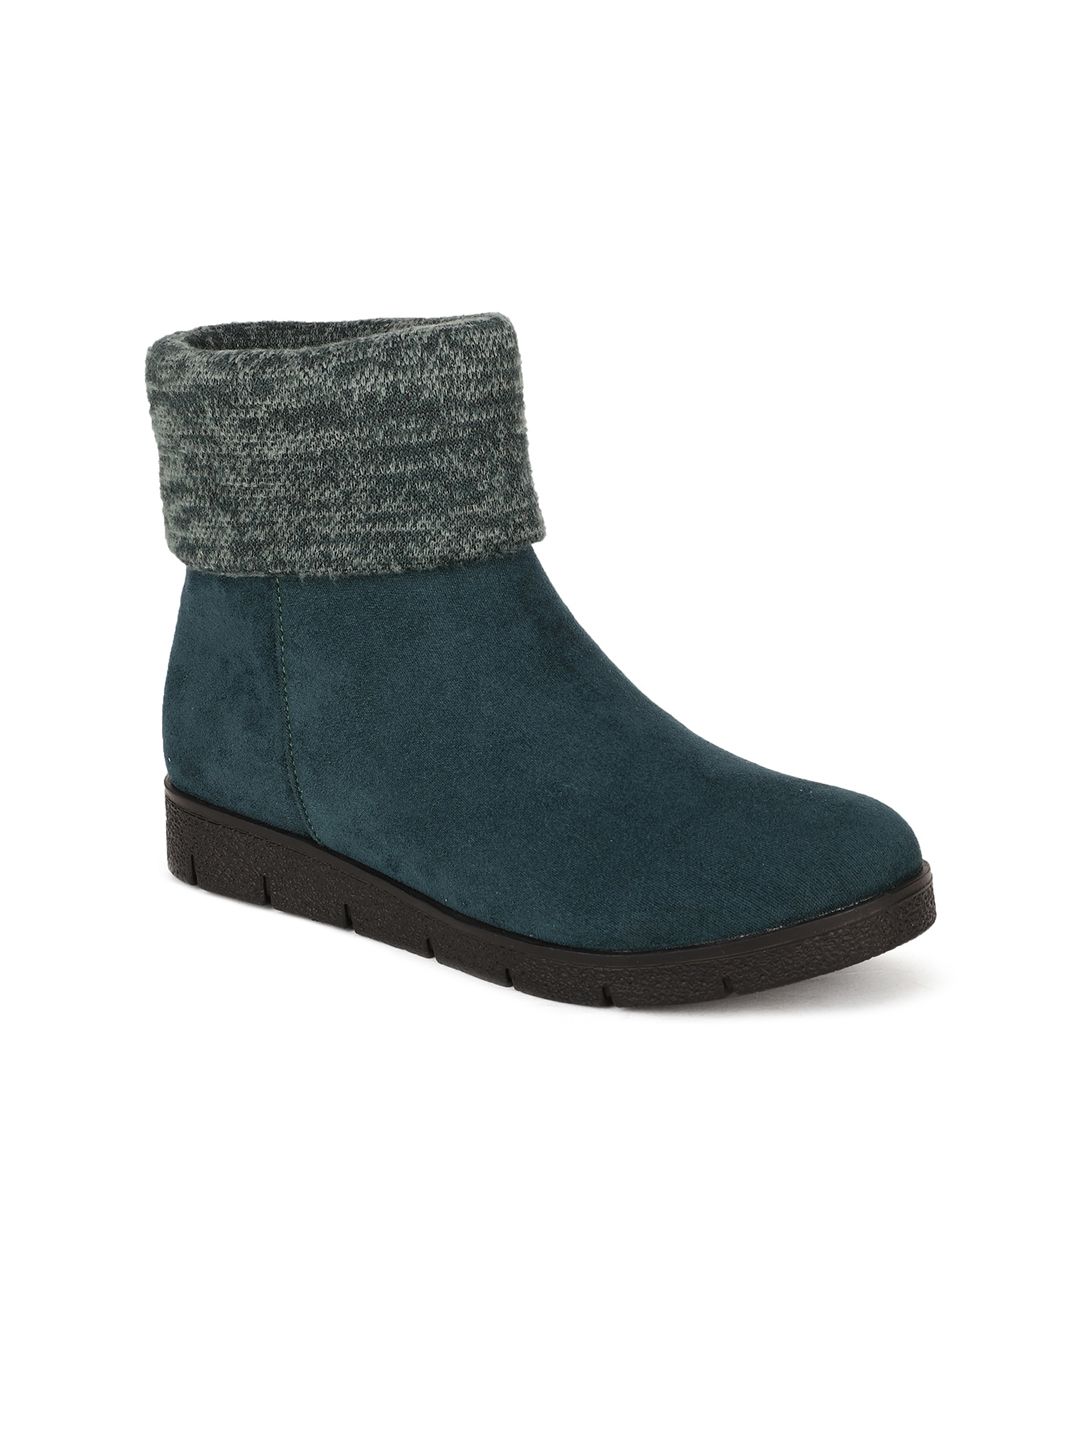 Bruno Manetti Green Suede Flatform Heeled Boots Price in India